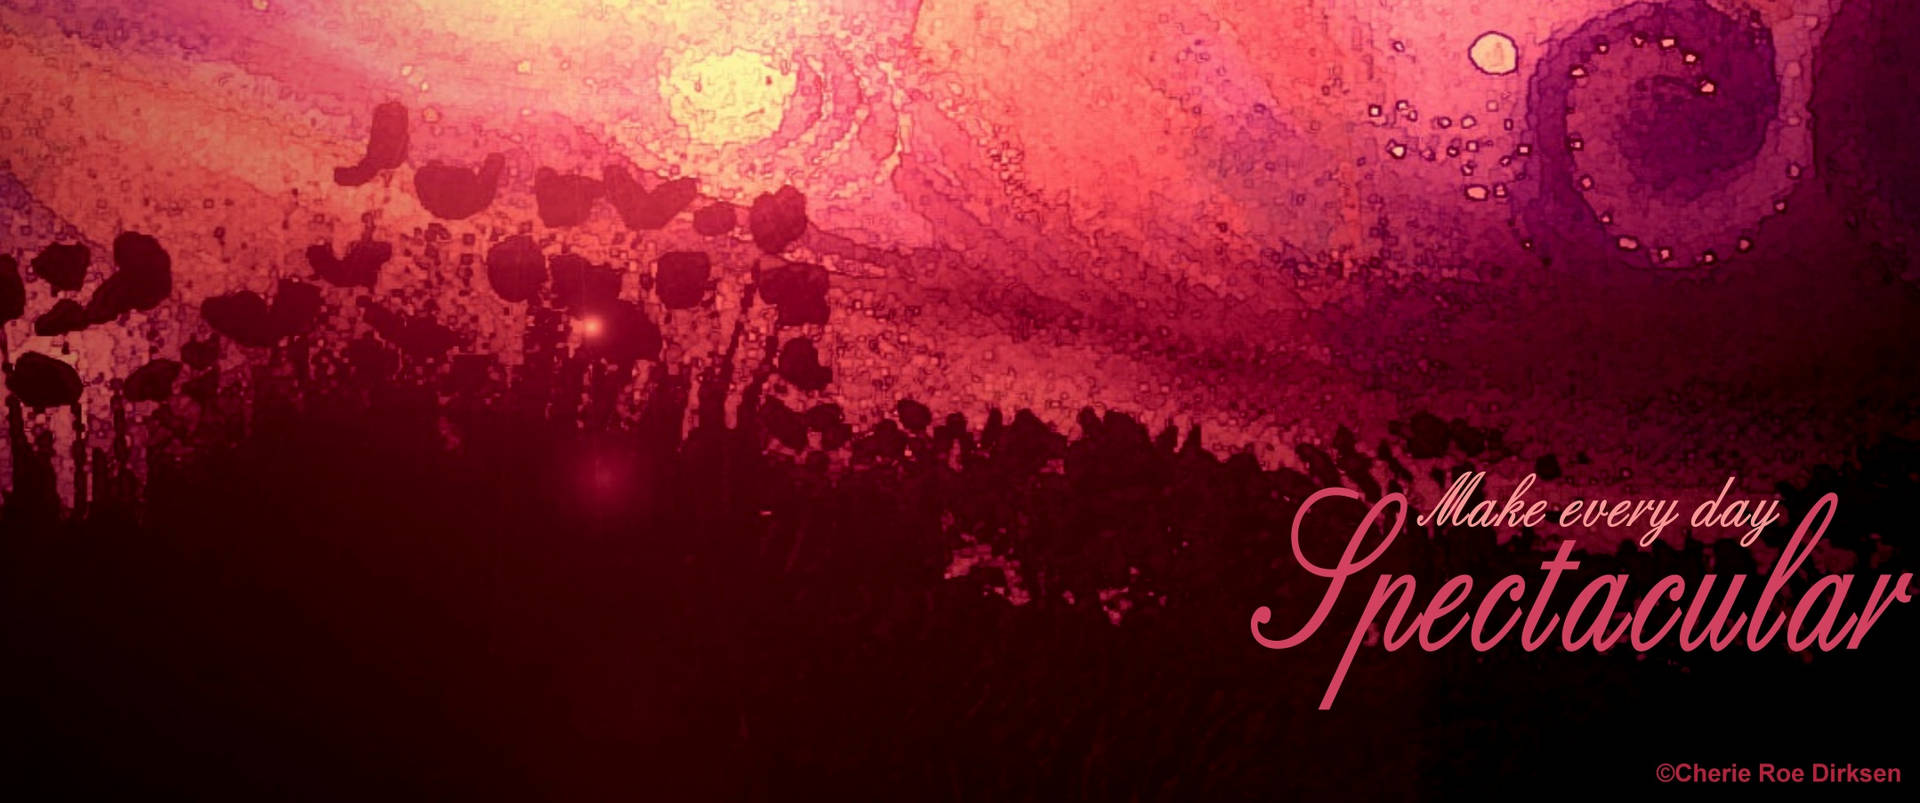 pink quotes facebook covers